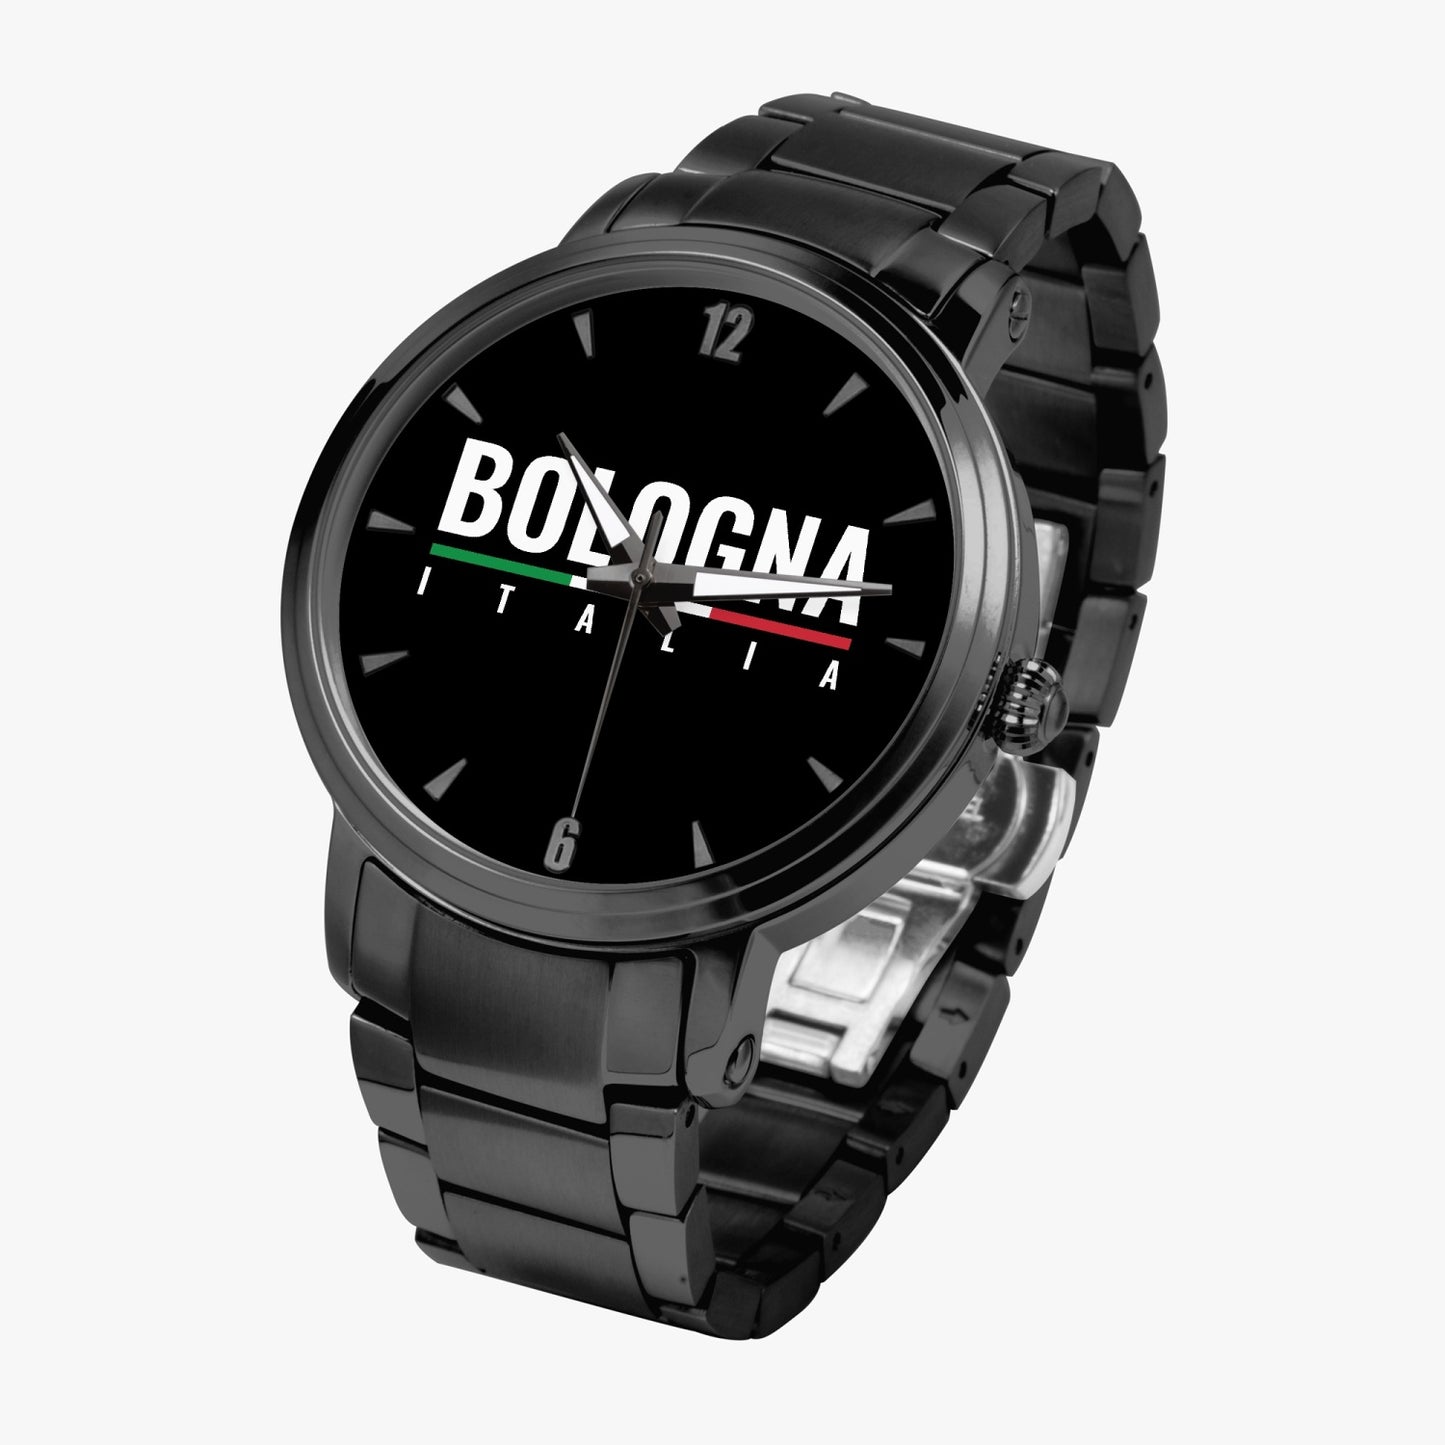 Bologna Italia Automatic Movement Watch - Premium Stainless Steel